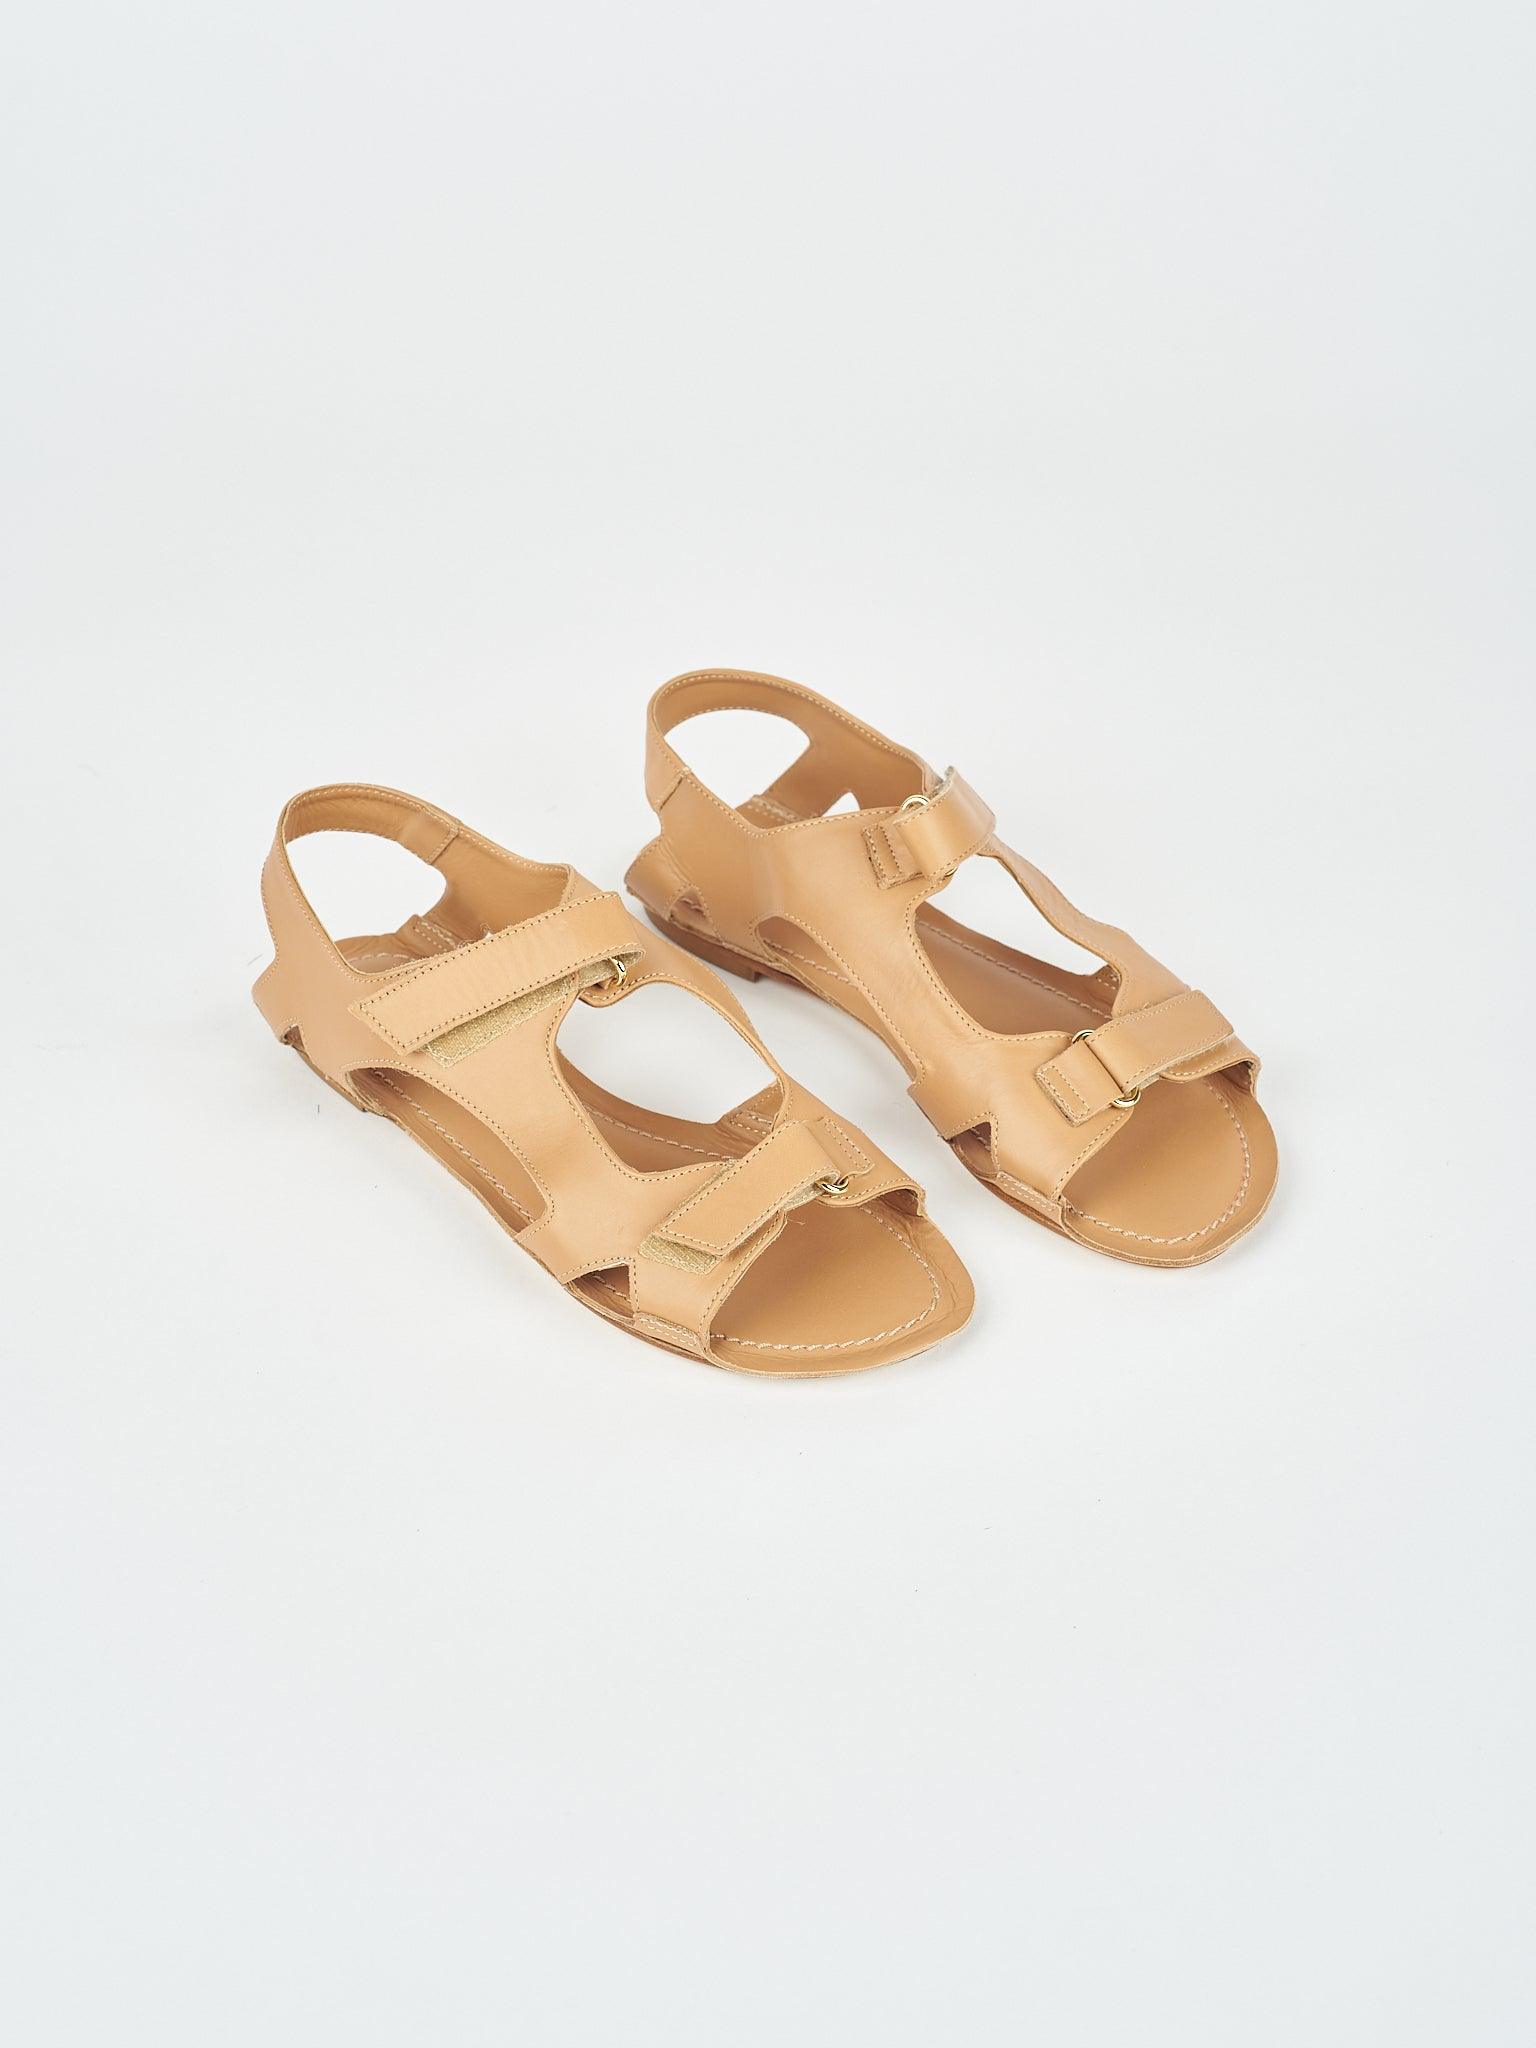 The Walking Sandal in Bare Angled Front View